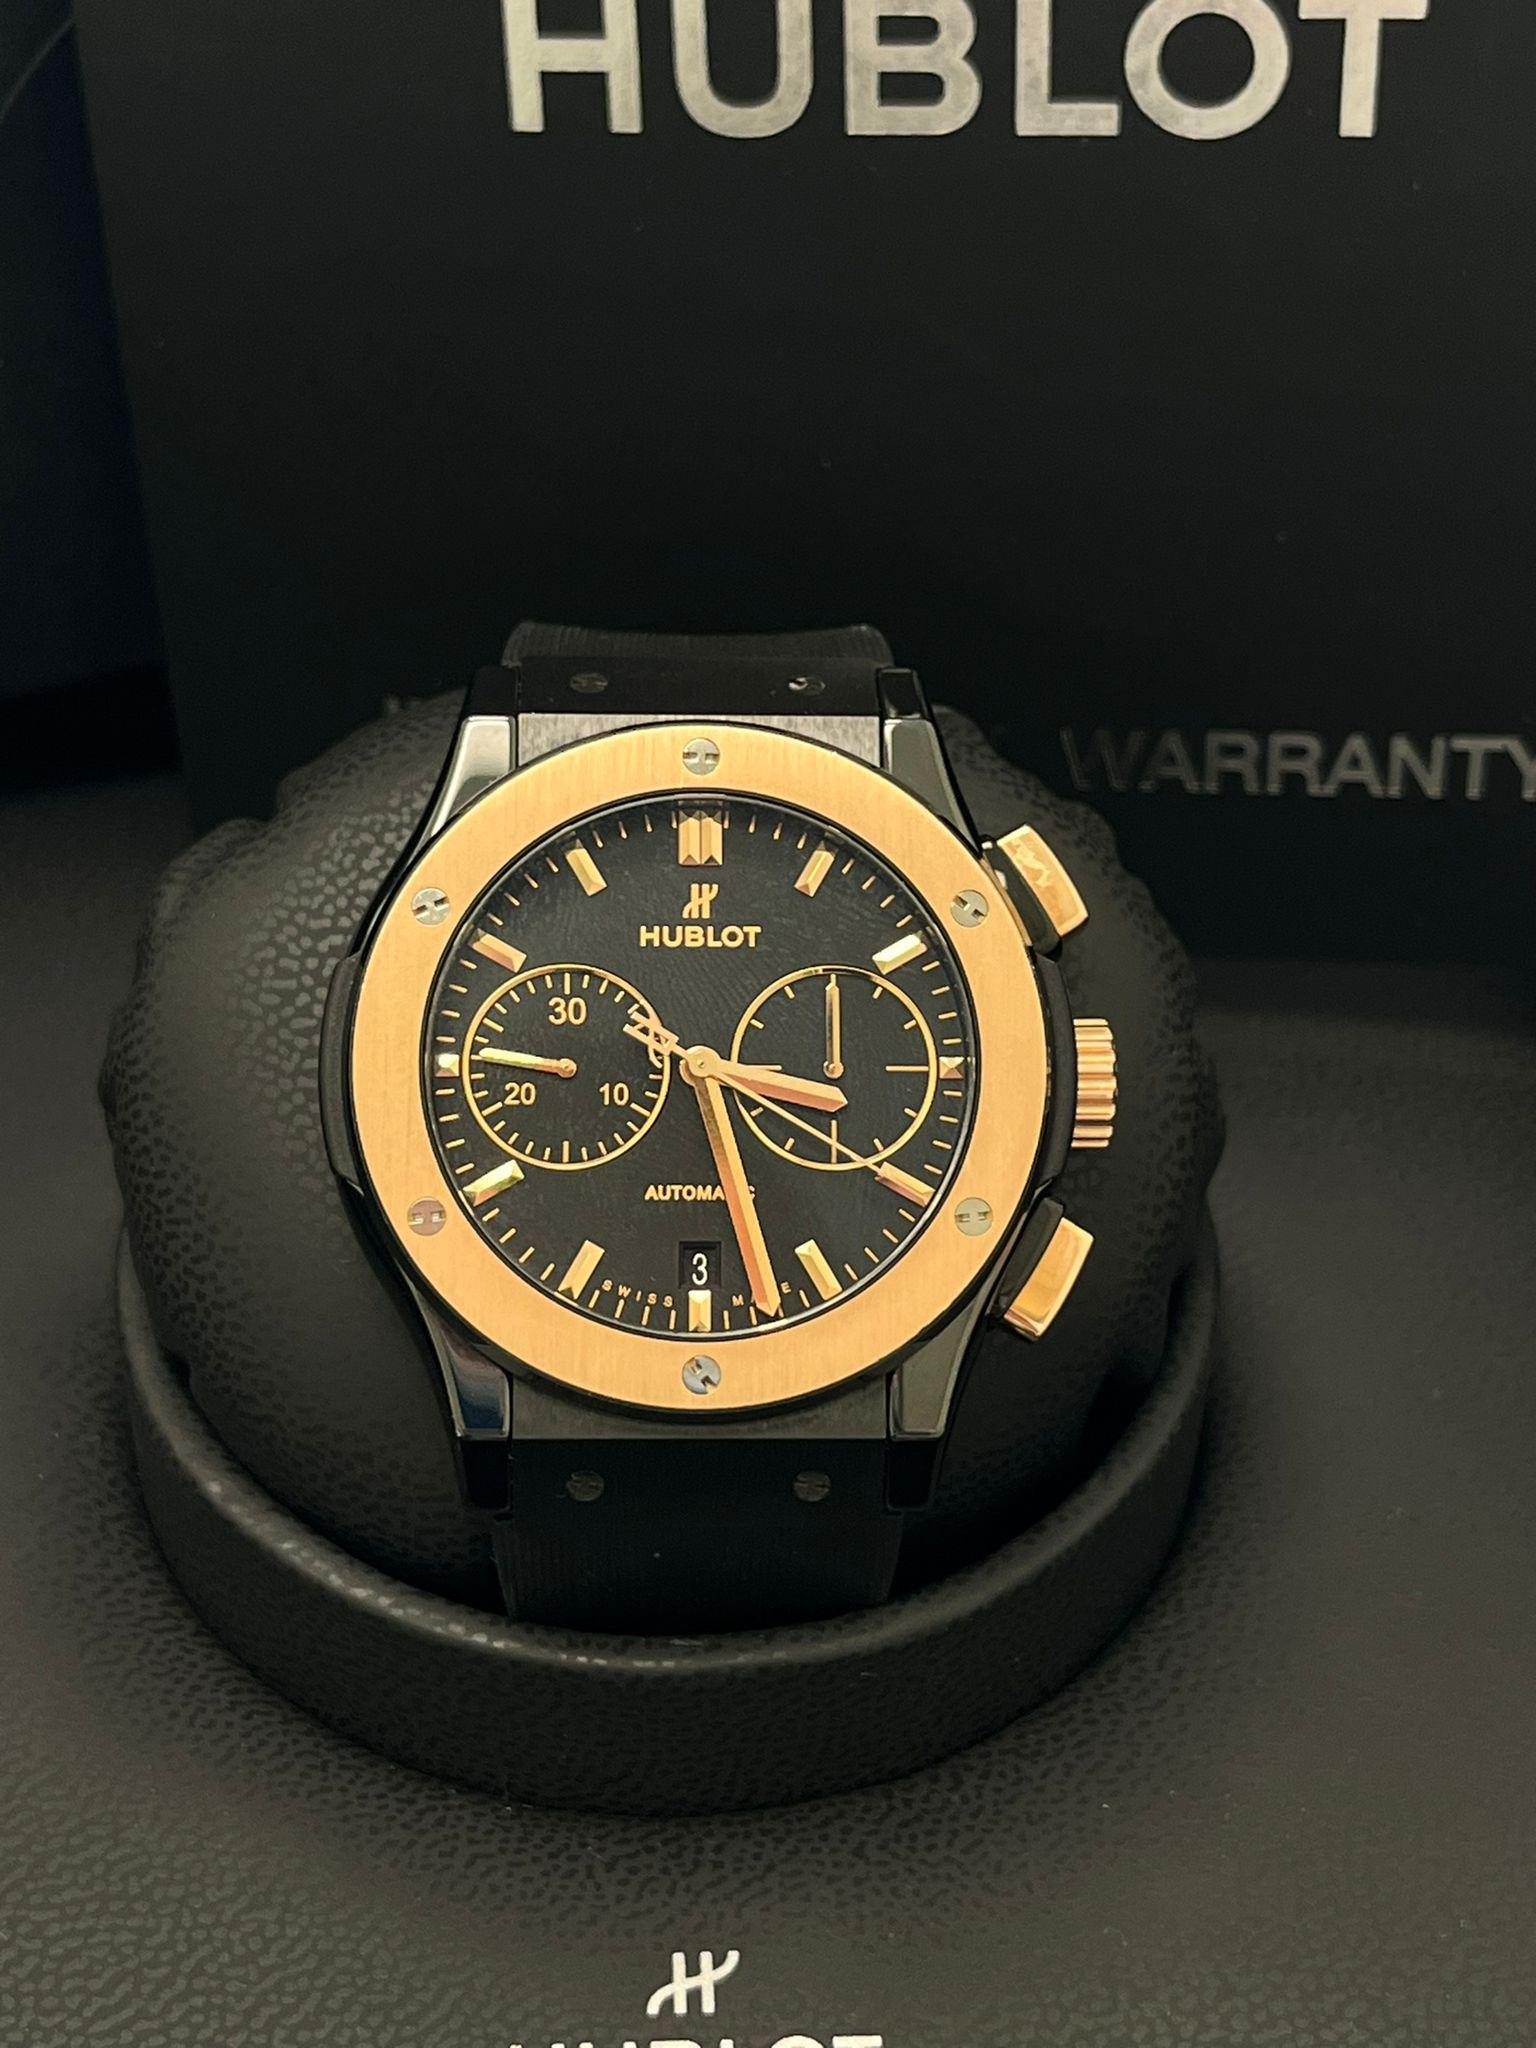 Hublot Classic Fusion Chronograph Ceramic King Gold 45mm Watch 521.CO.1181.RX For Sale 3